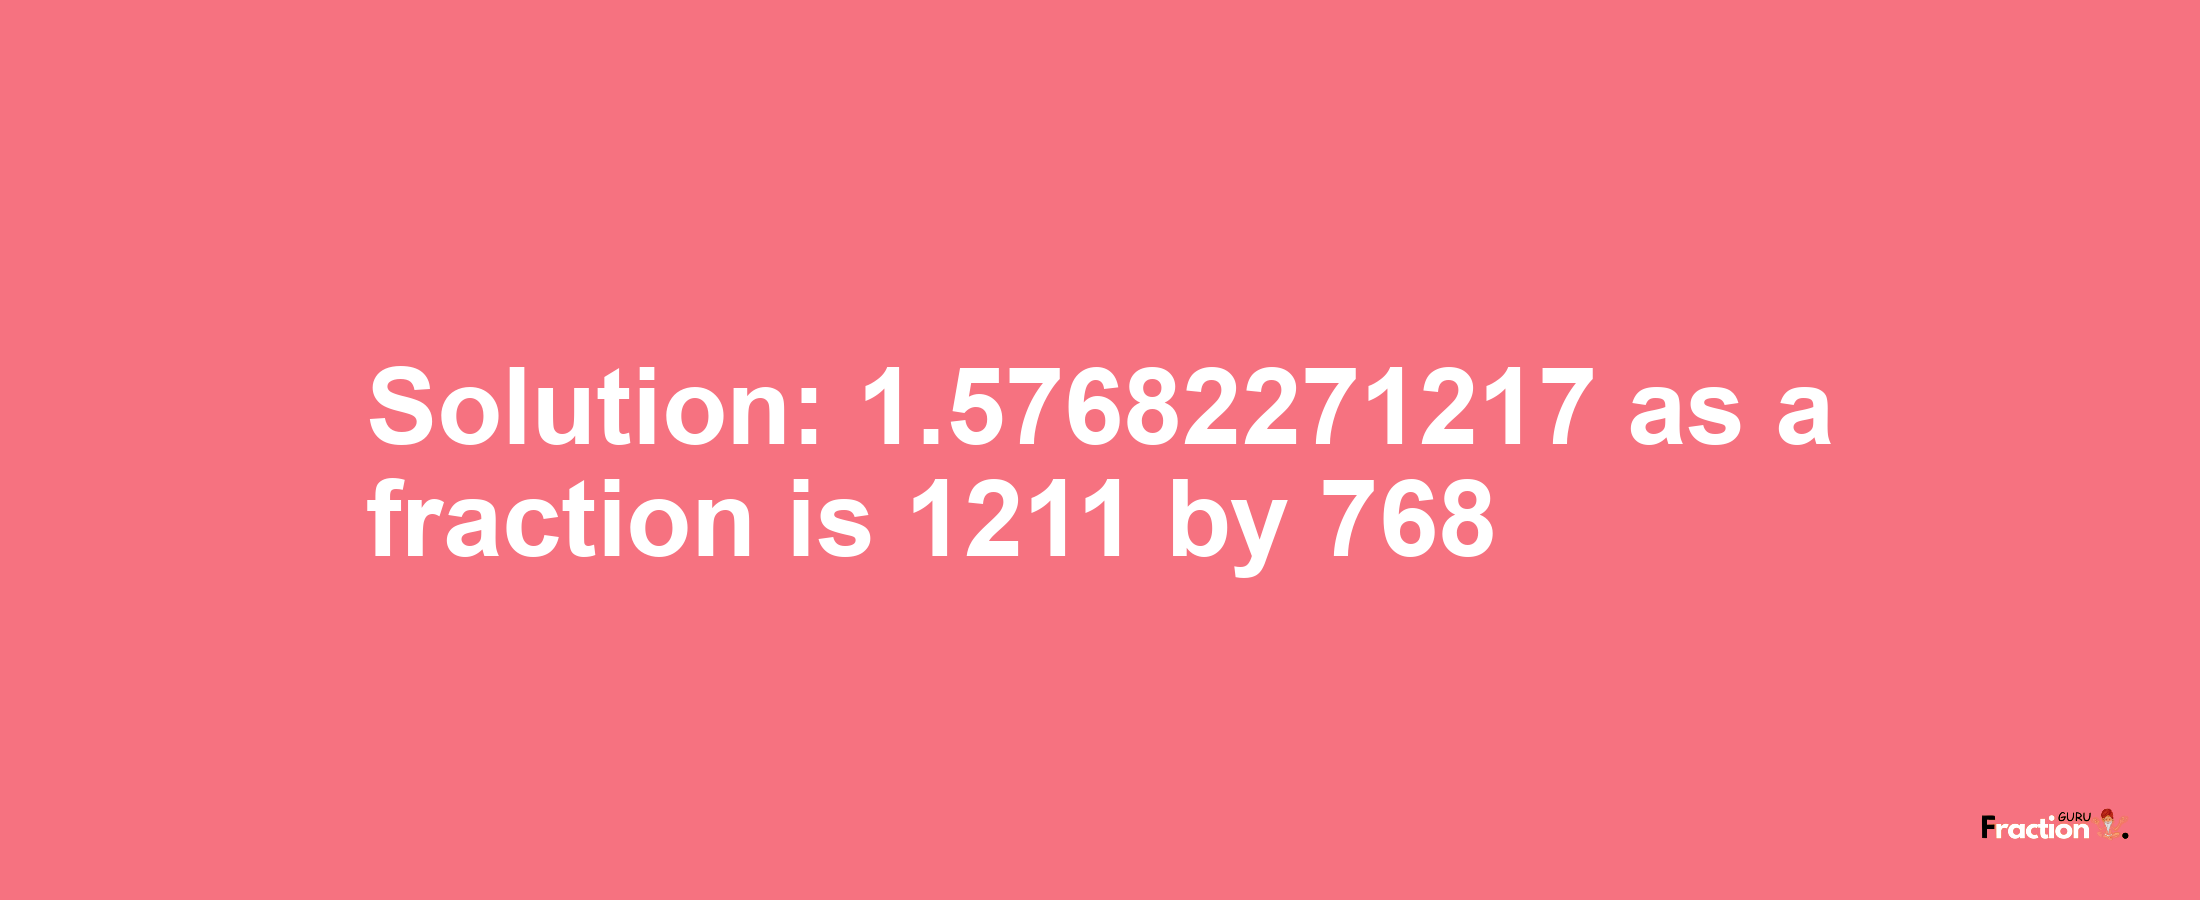 Solution:1.57682271217 as a fraction is 1211/768